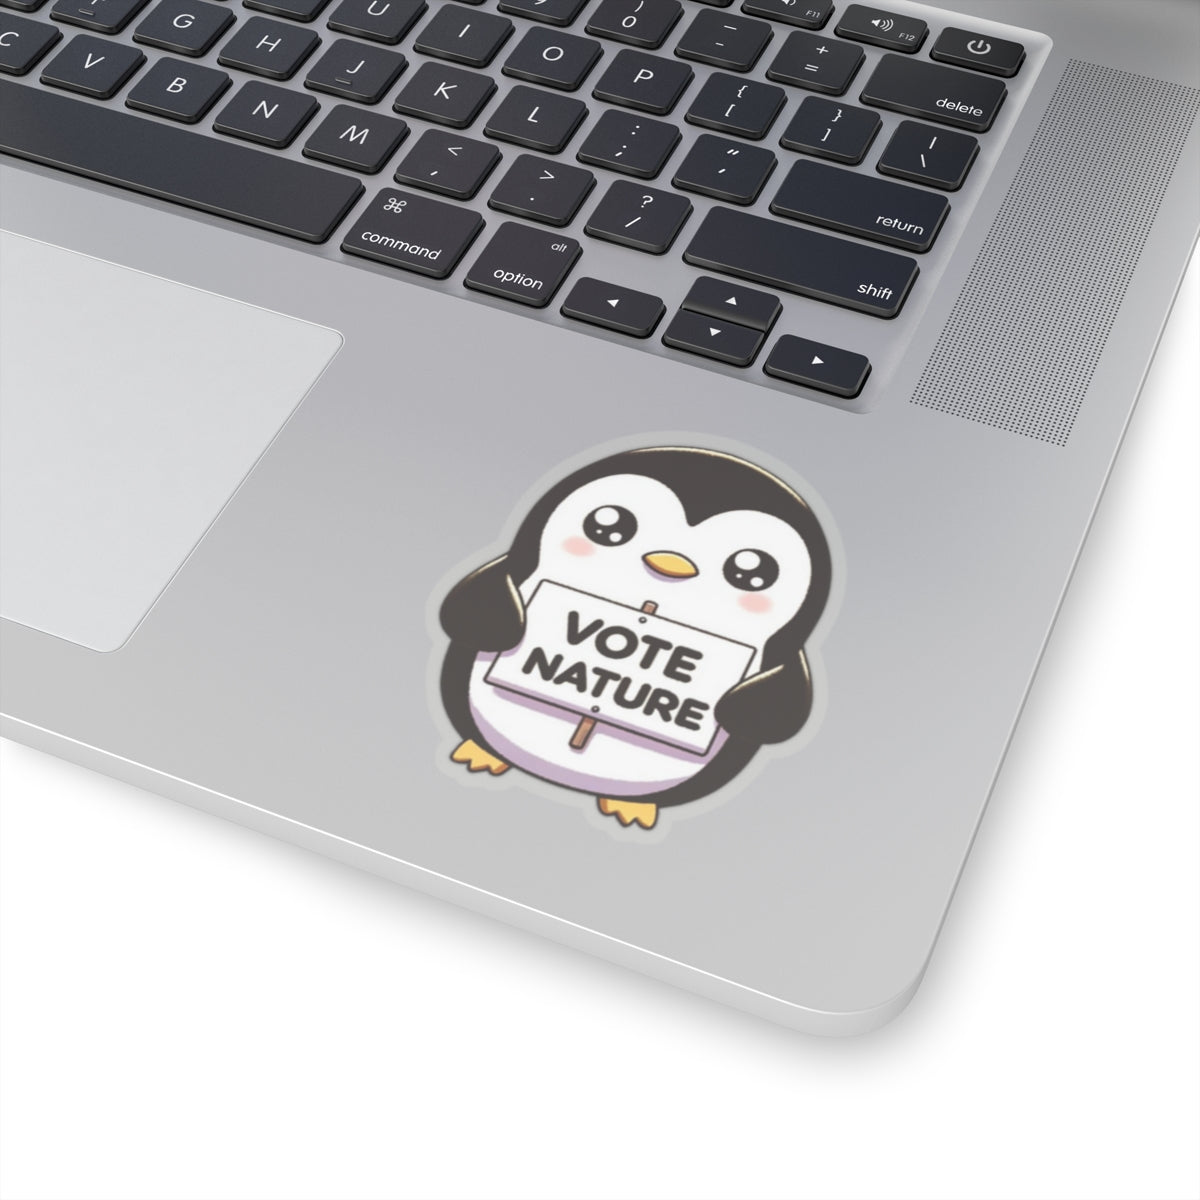 Inspirational Cute Penguin Statement vinyl Sticker: Vote Nature! for laptop, kindle, phone, ipad, instrument case, notebook, mood board